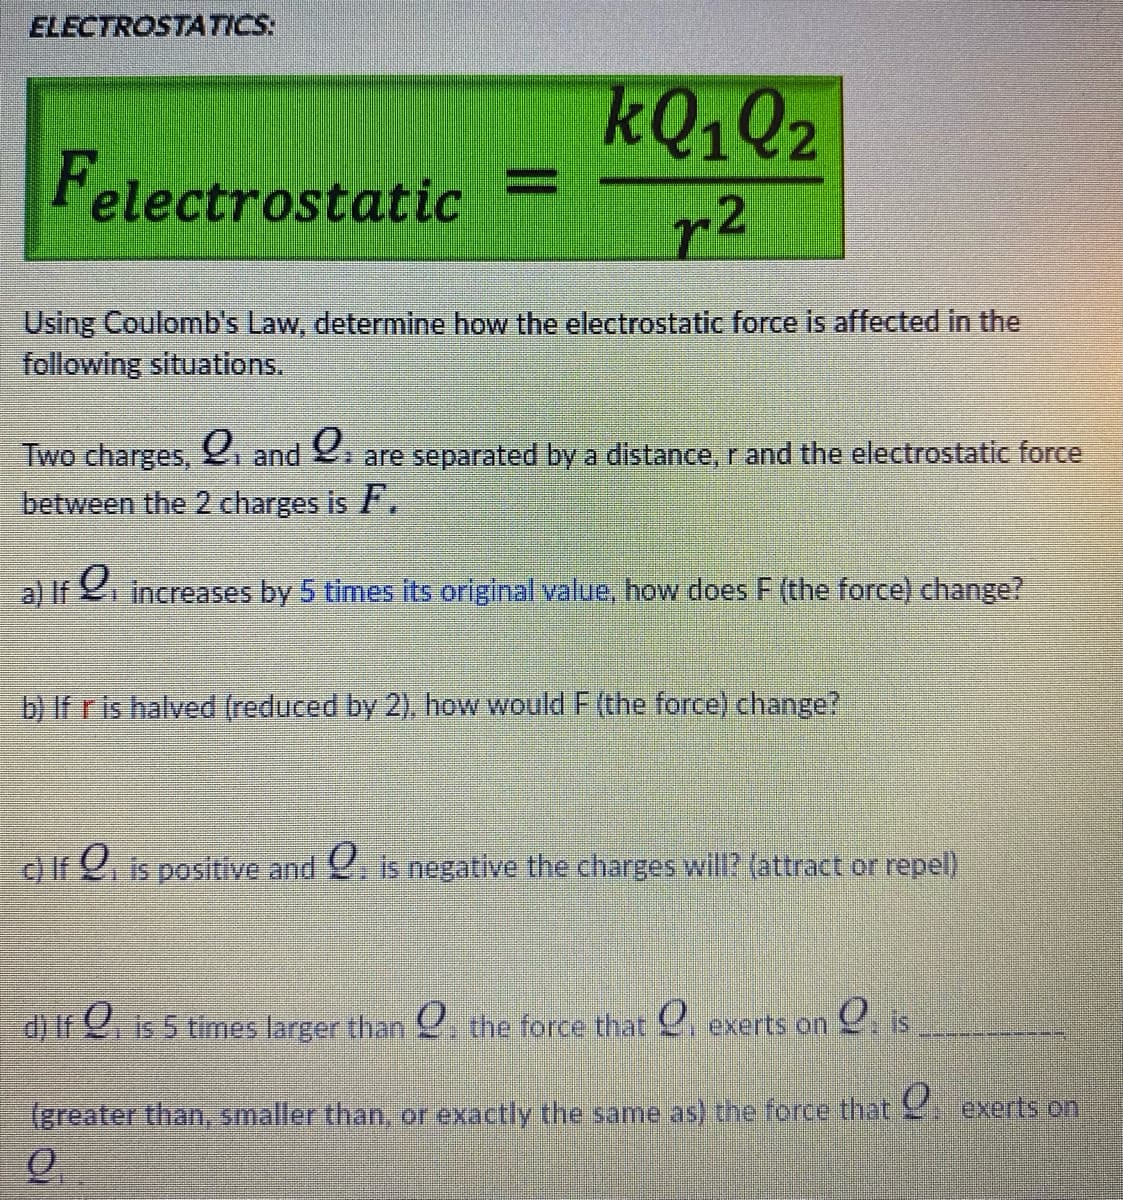 ELECTROSTATICS:
KQ1Q2
Felectrostatic =
r2
%3D
Using Coulomb's Law, determine how the electrostatic force is affected in the
following situations.
Two charges, and . are separated by a distance, r and the electrostatic force
between the 2 charges is ,
a) If increases by 5 times its original value, how does F (the force) change?
b) If r is halved (reduced by 2). how would F (the force) change?
c) If 2. is positive and . is negative the charges will? (attract or repel)
d) If . is 5 times larger than the force that . exerts on . is
(greater than, smaller than, or exactly the same as) the force that exerts on
